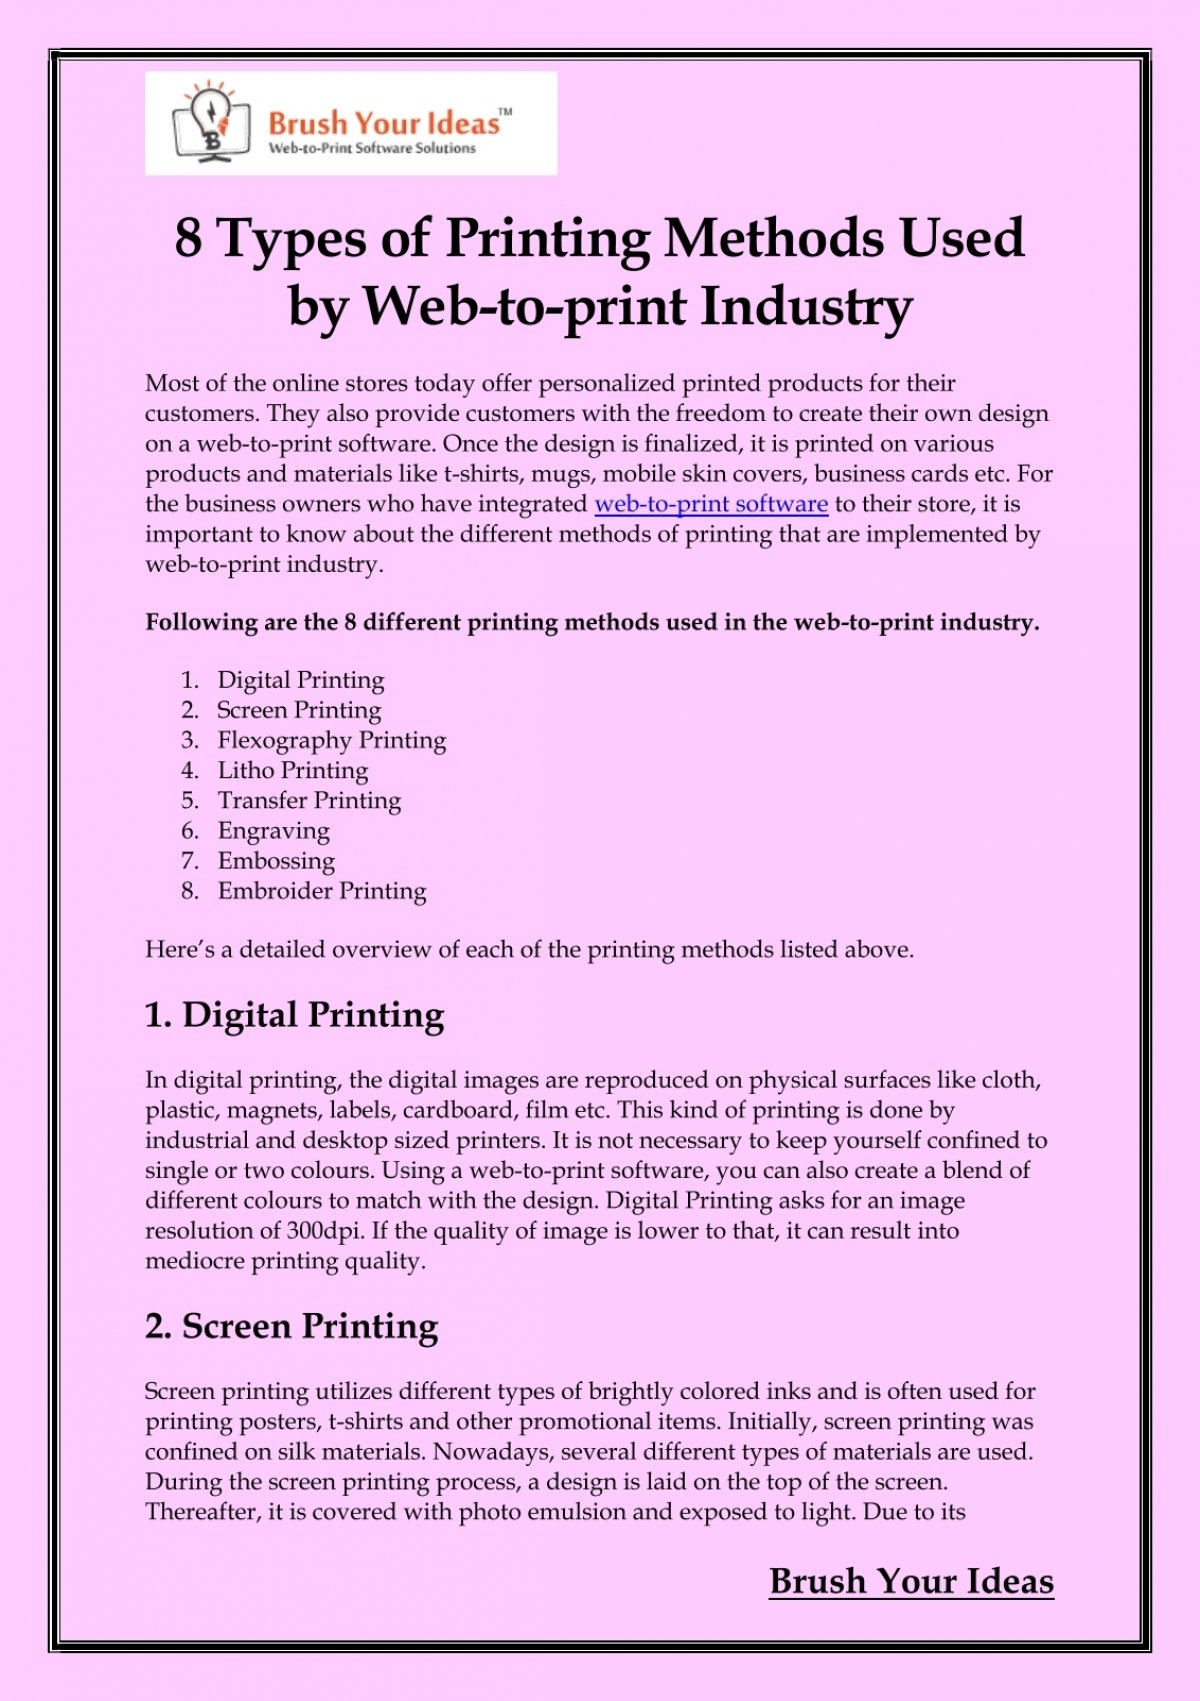 8-types-of-printing-methods-used-by-web-to-print-industry